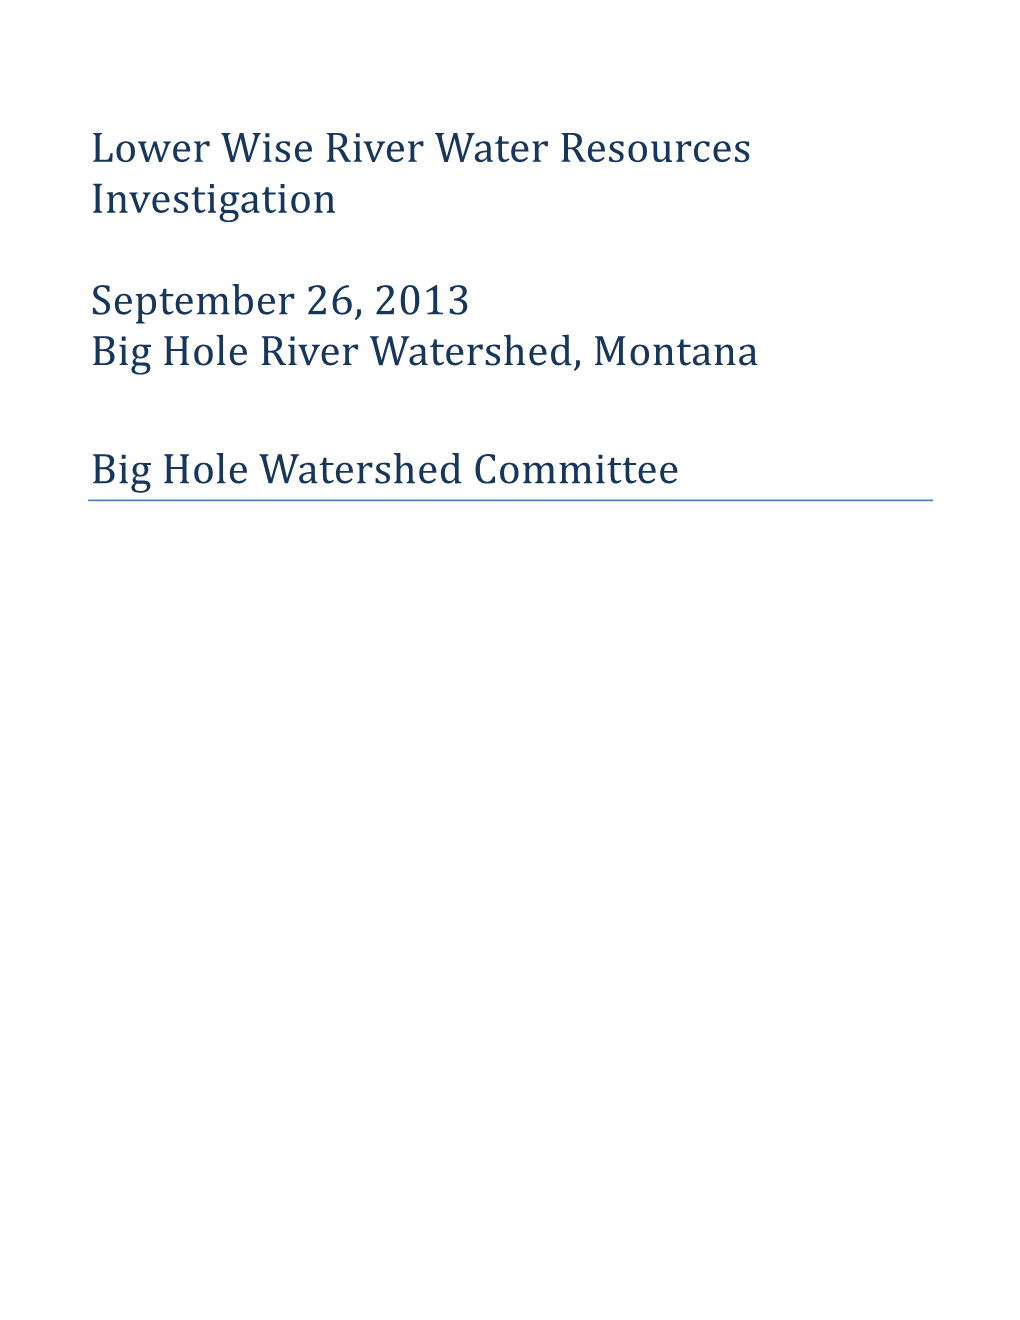 Lower Wise River Water Resources Investigation (2013)